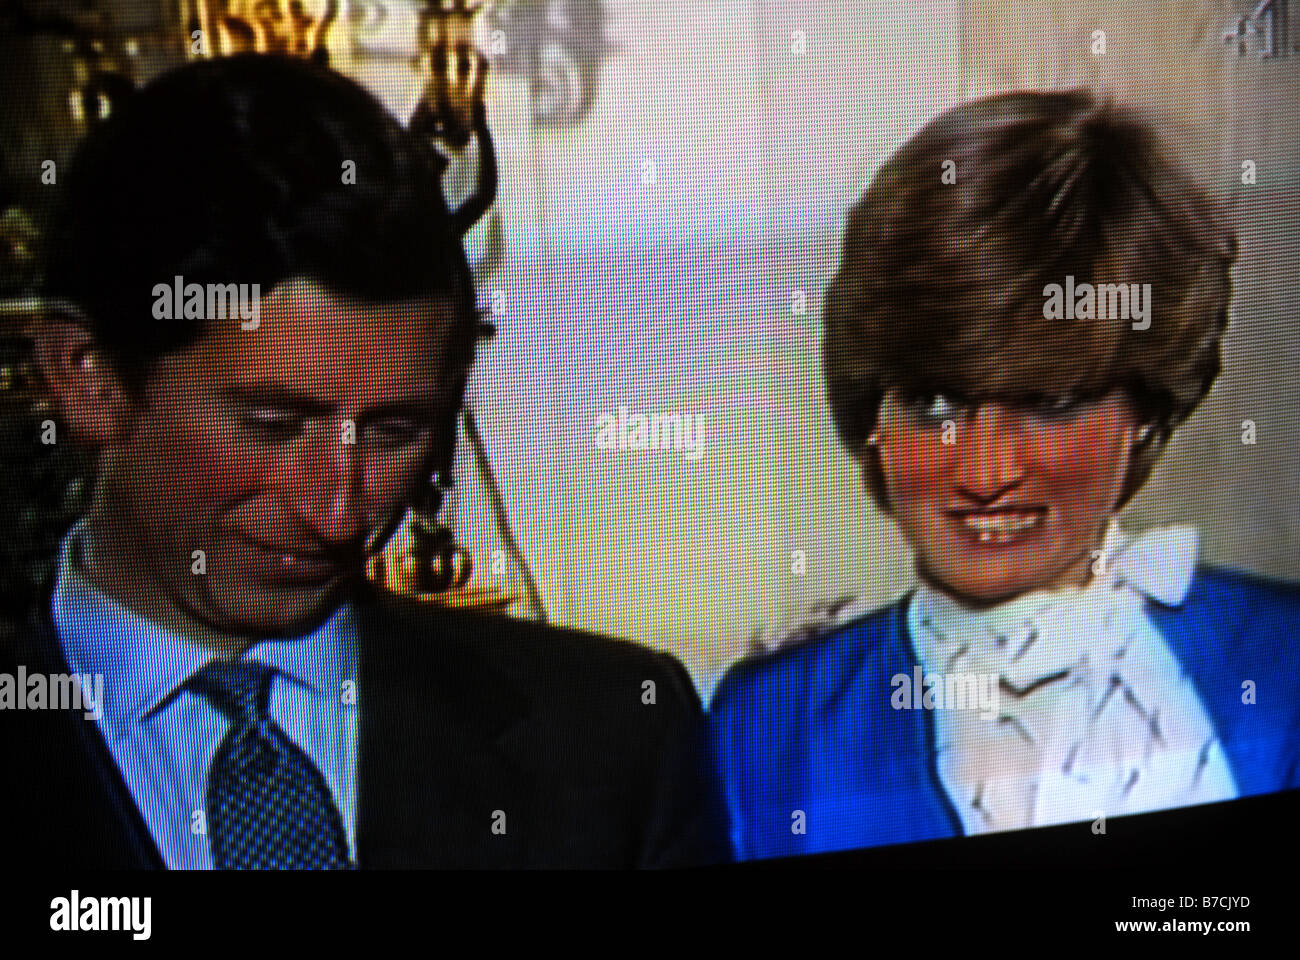 Princess Diana and Prince Charles together on a News Broadcast shortly after their marriage on 29th July 1981. Stock Photo